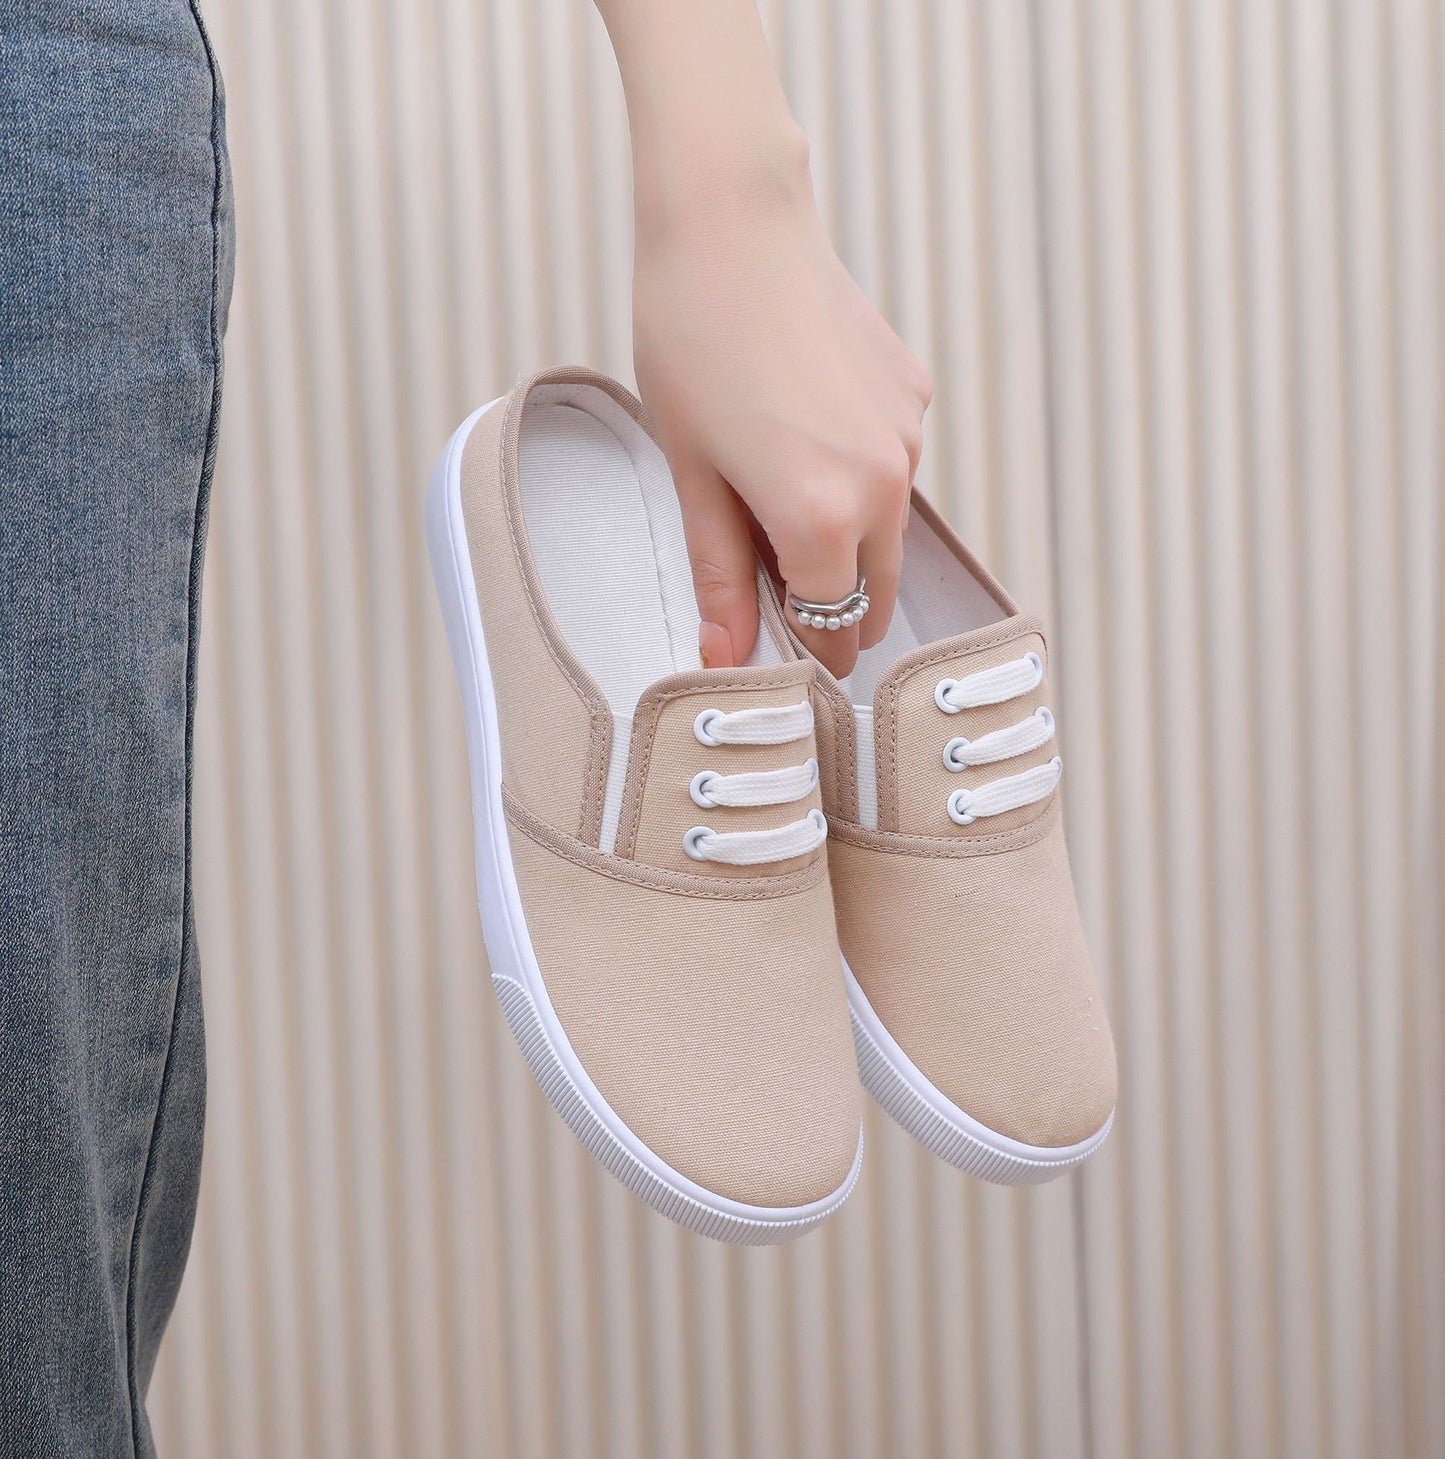 Factory Supply Slip-on Canvas Shoes Flat All-Match Pure White Cloth Shoes Female Nurse Lazy Shoes Casual Students' Shoes